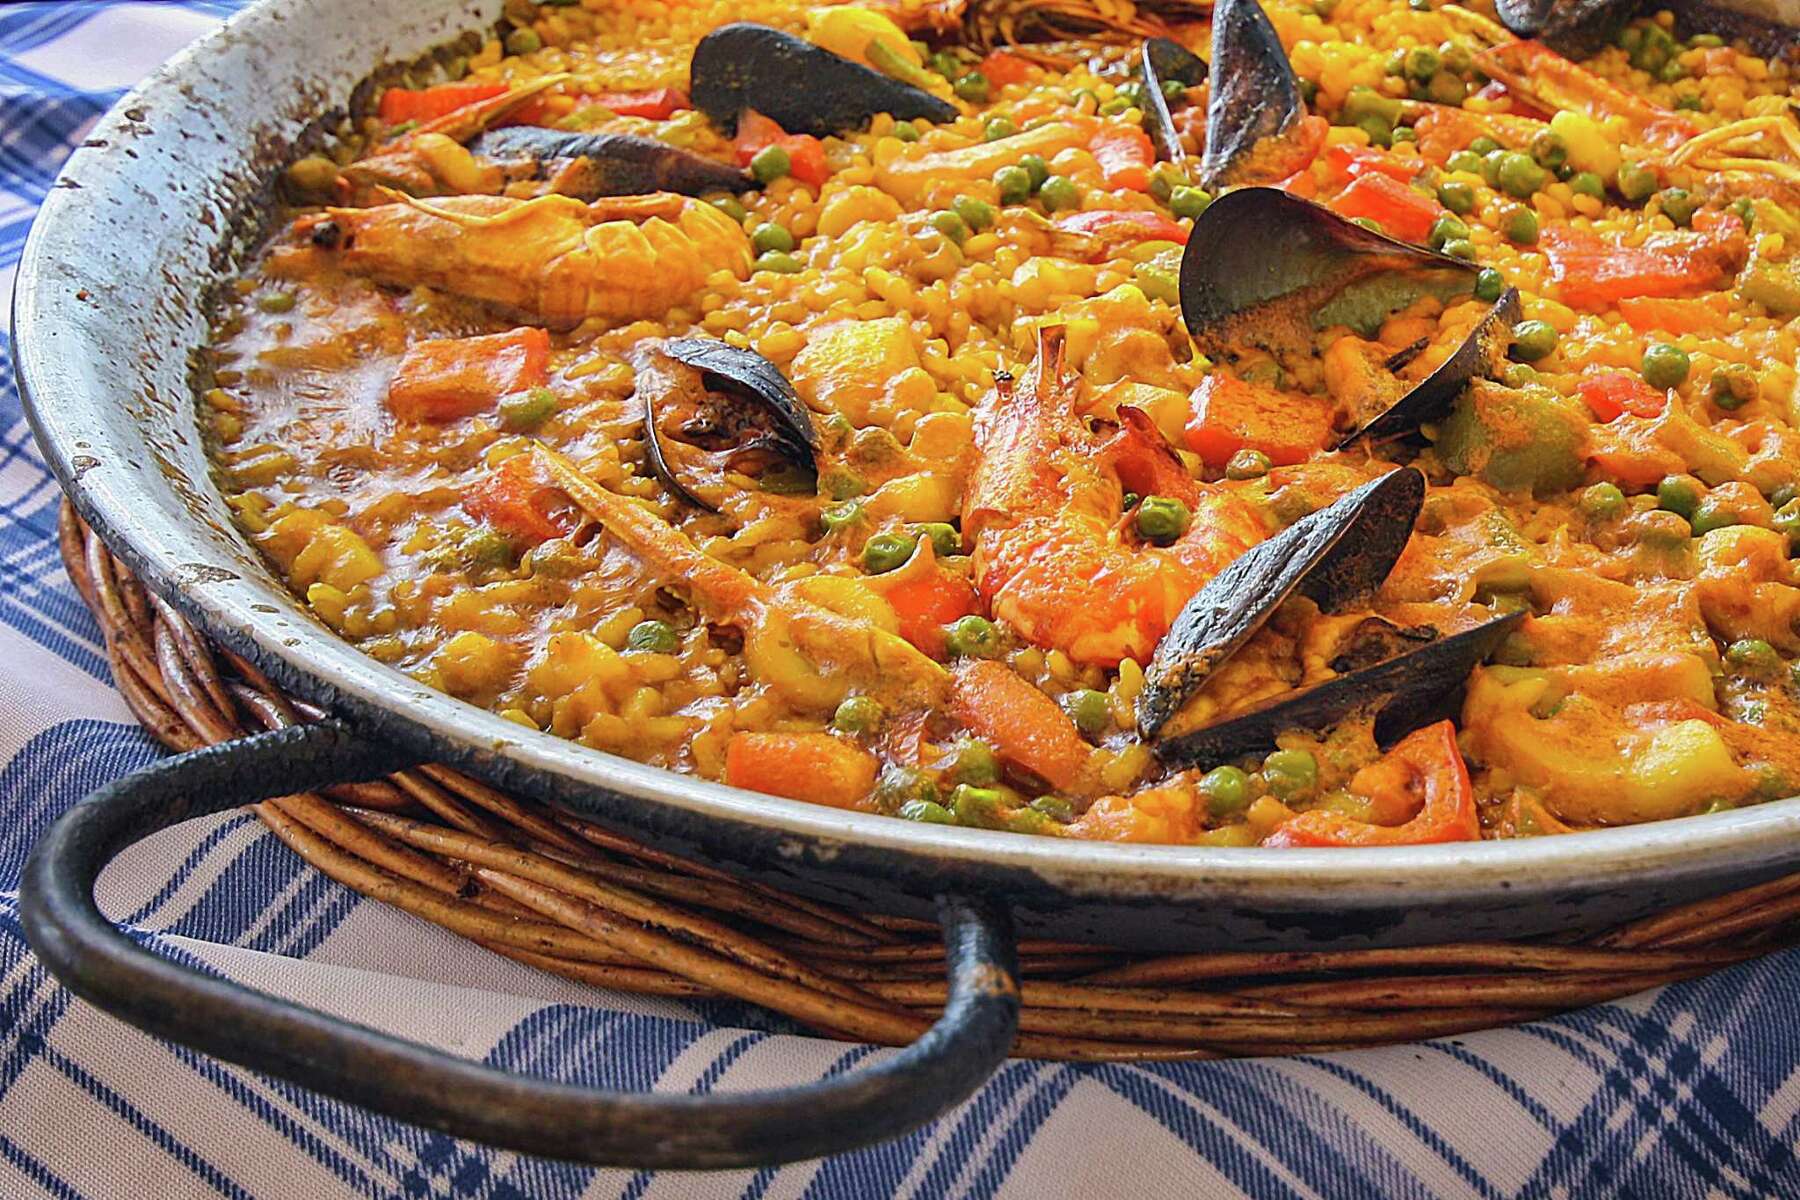 Paul's Cooking Tips: How to use a paella pan for biscuits, stir fry,  roasting chicken and more